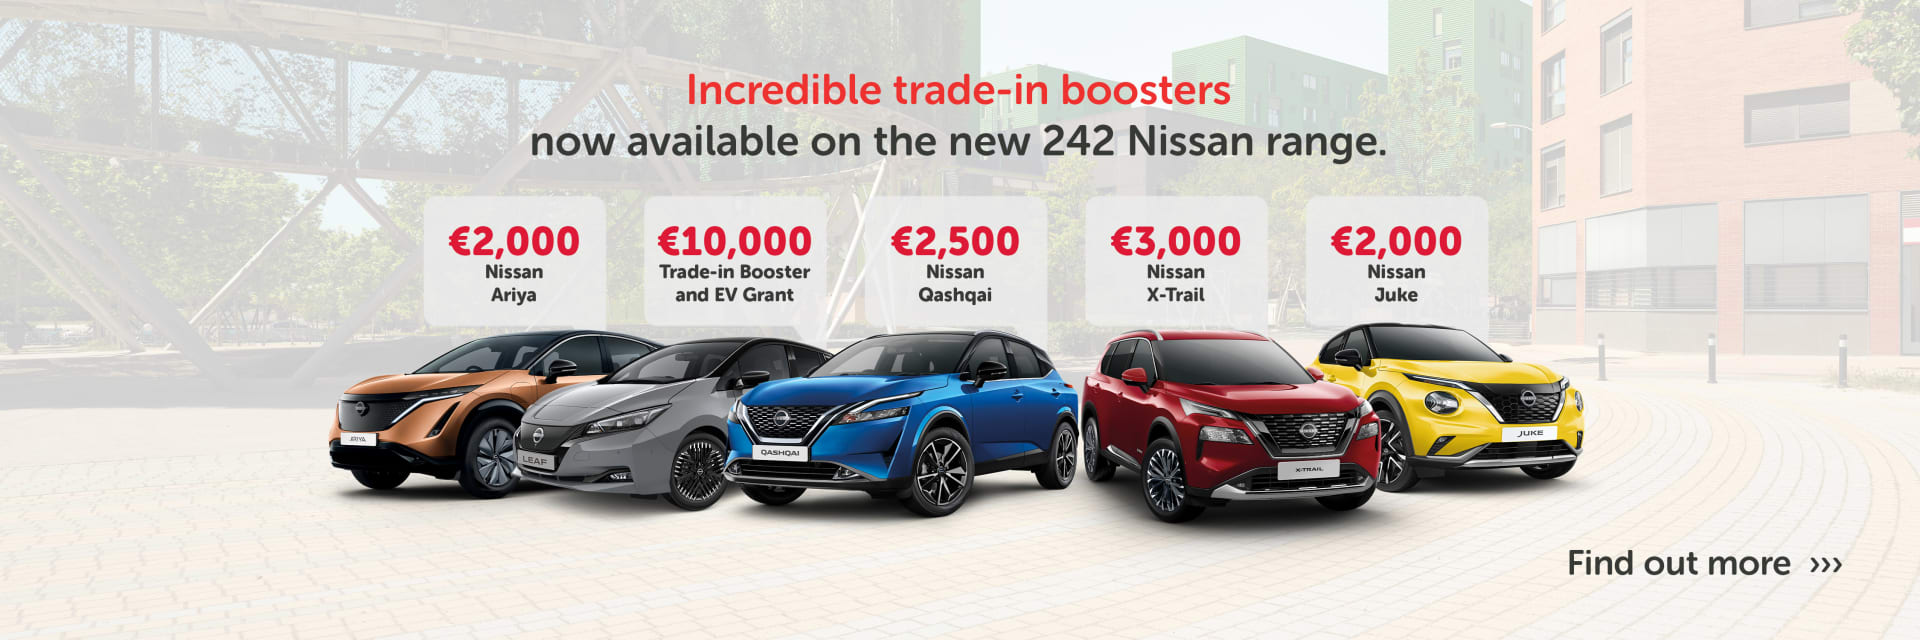 nissan 242 offers